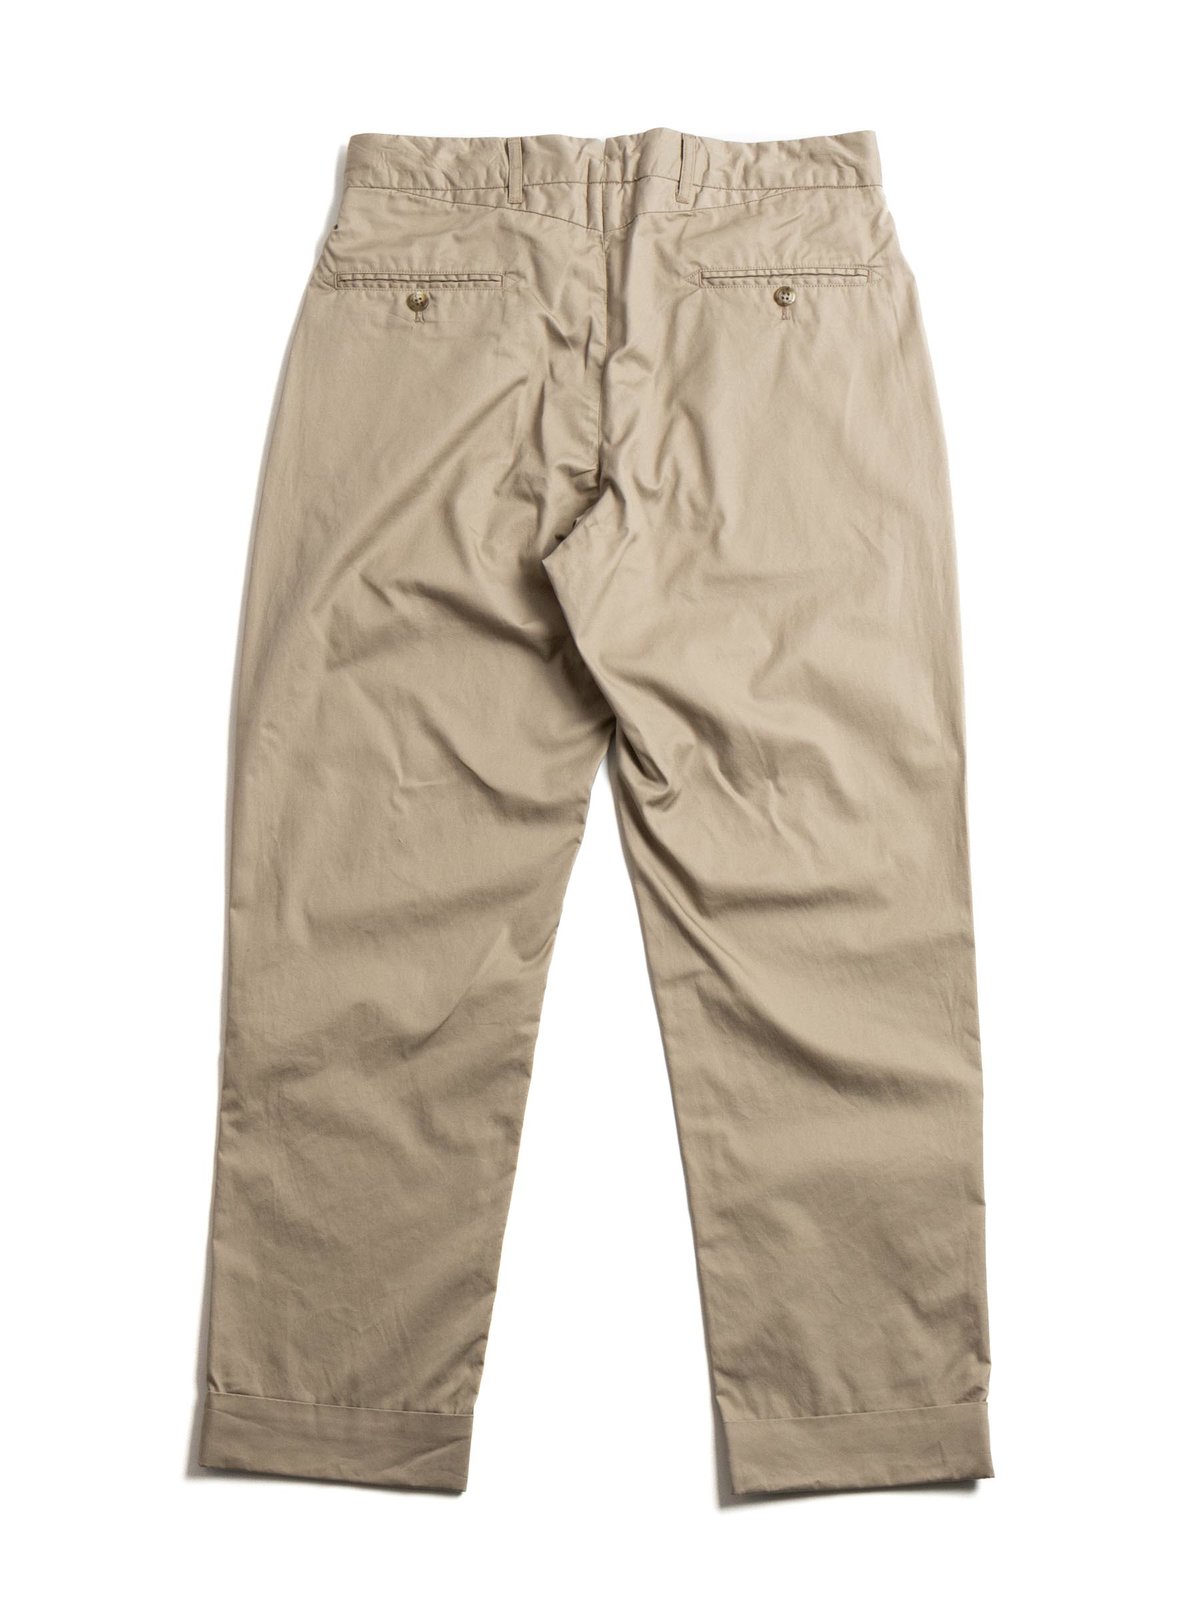 ANDOVER PANT KHAKI HIGH COUNT TWILL - Image 6